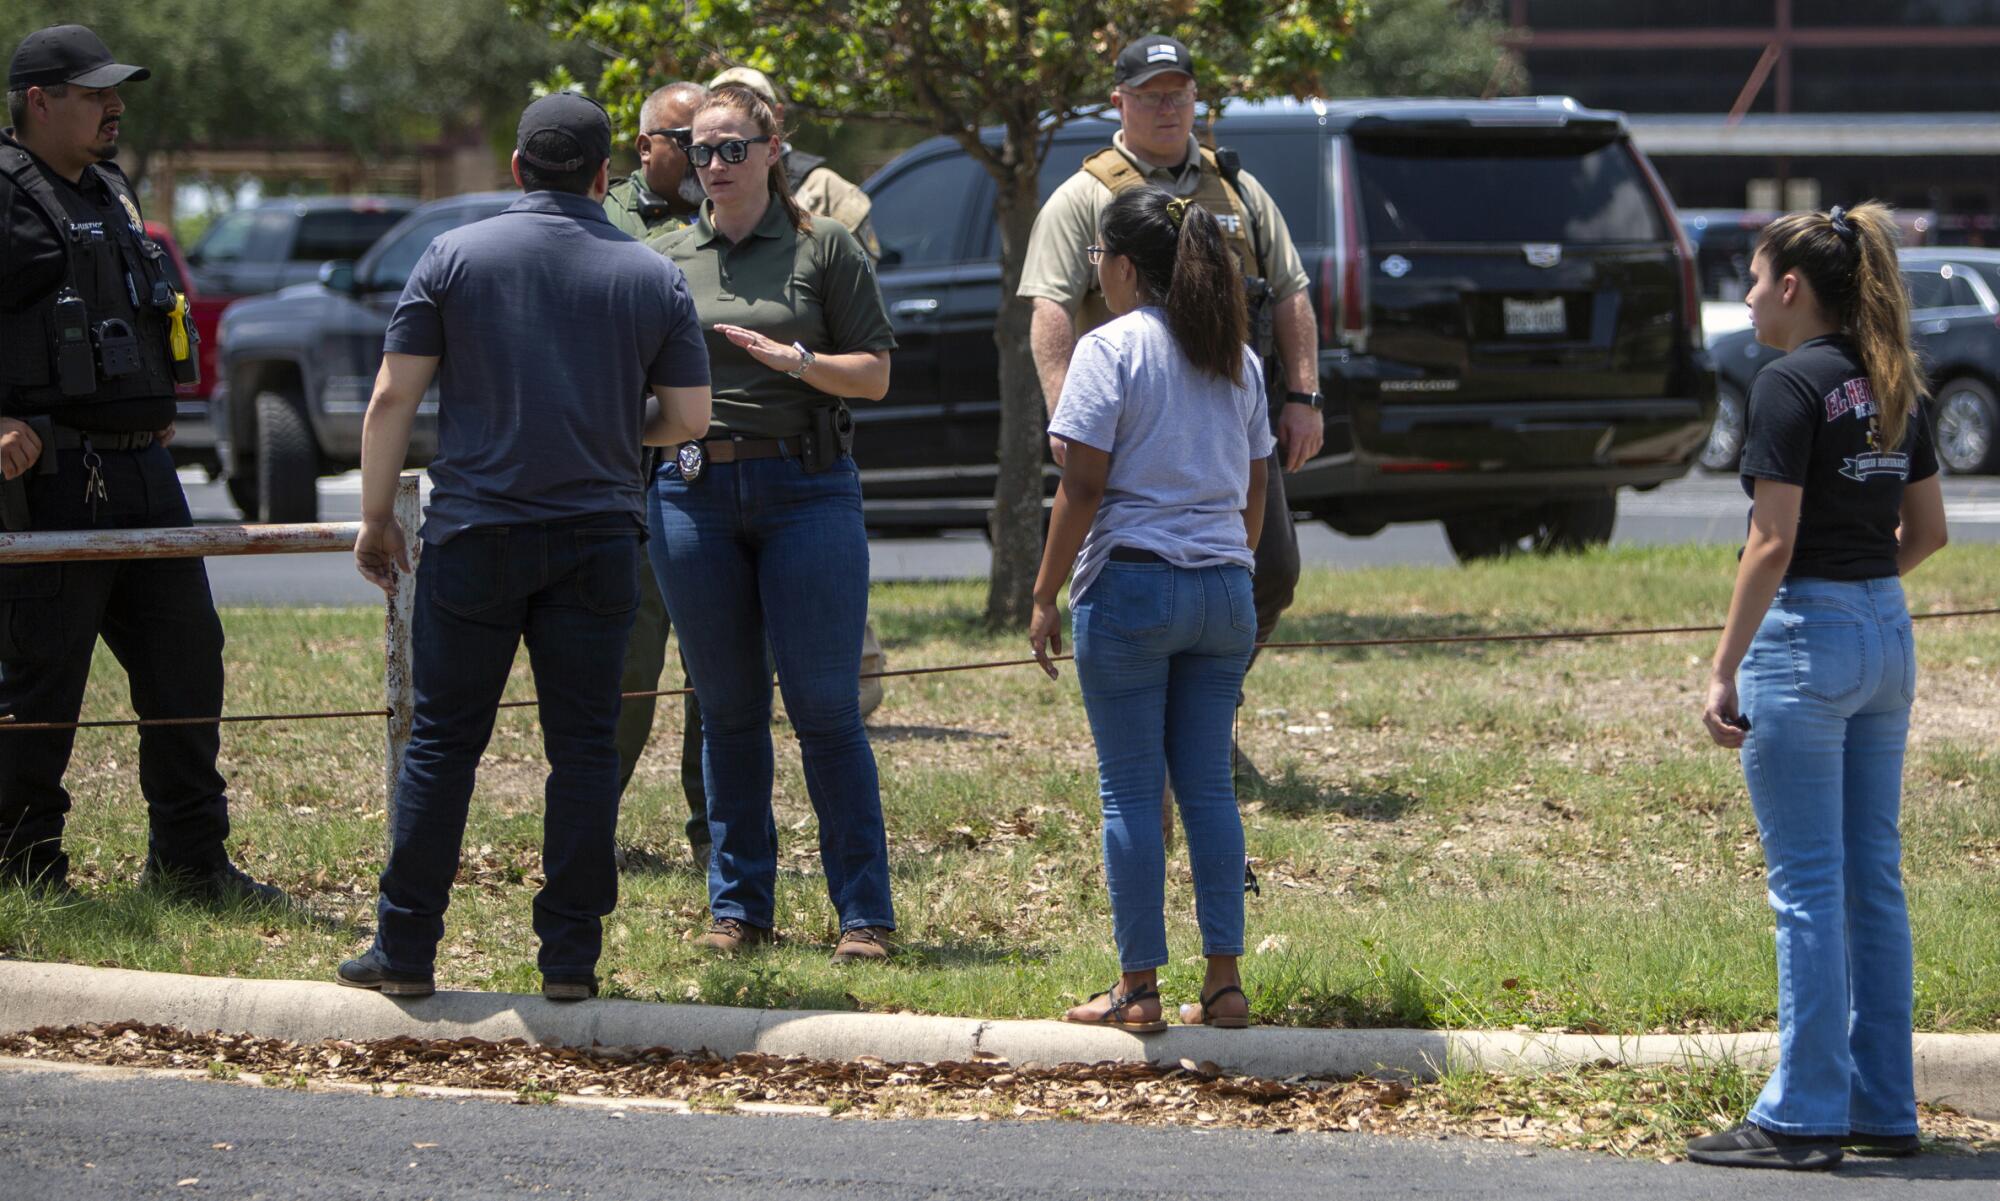 A woman in a green shirt and jeans standing near uniformed officers speaks to a man as two young women look on 